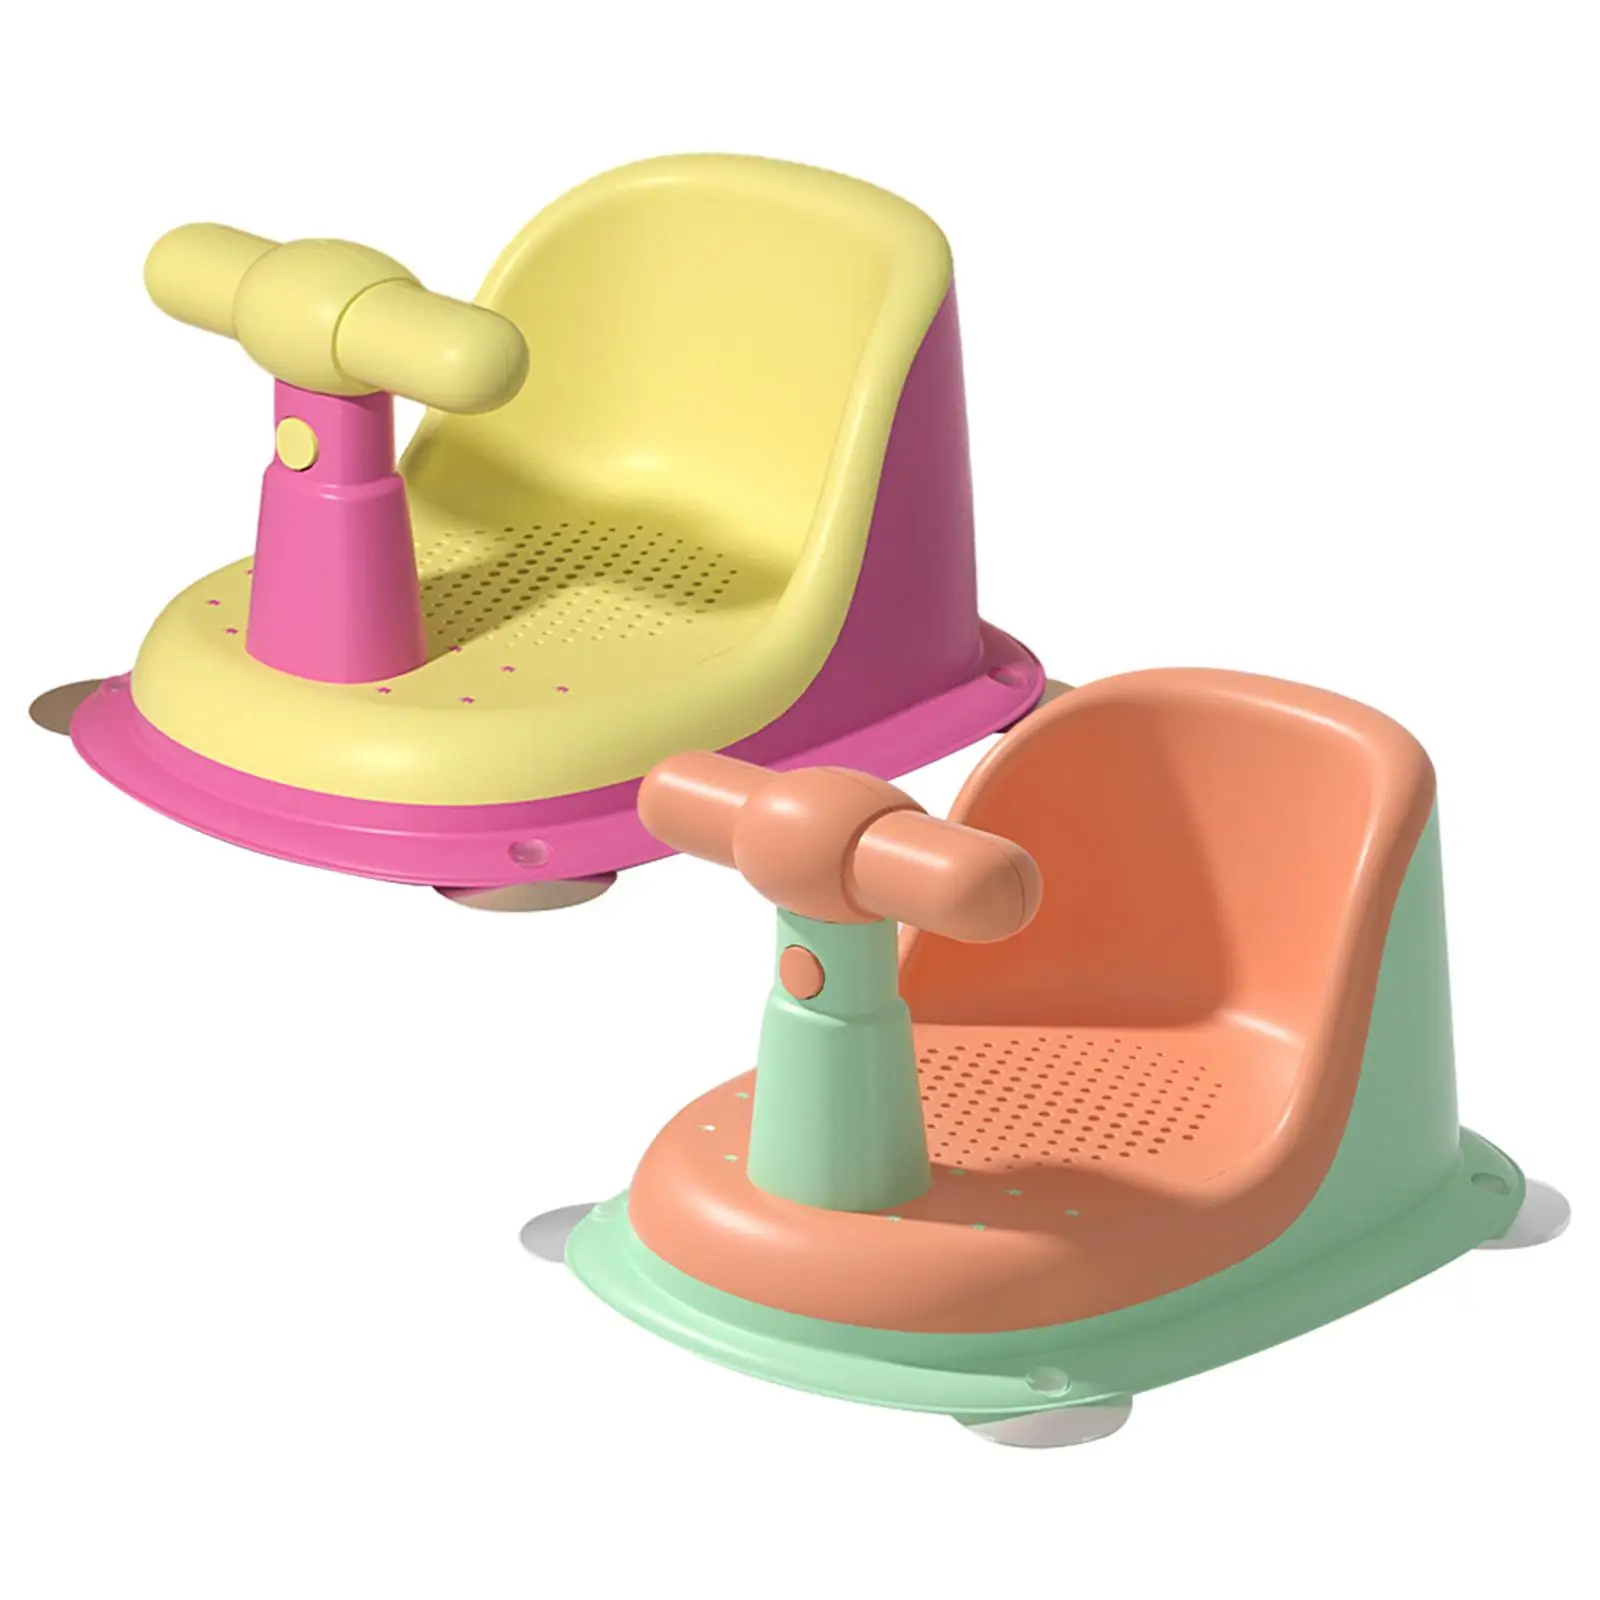 Bathroom Baby Bath Seat Soft Seat Pad Safety Non Slip Bath Seat Support Suction Cup Shower Seat for Boys Girls Over 6 Months